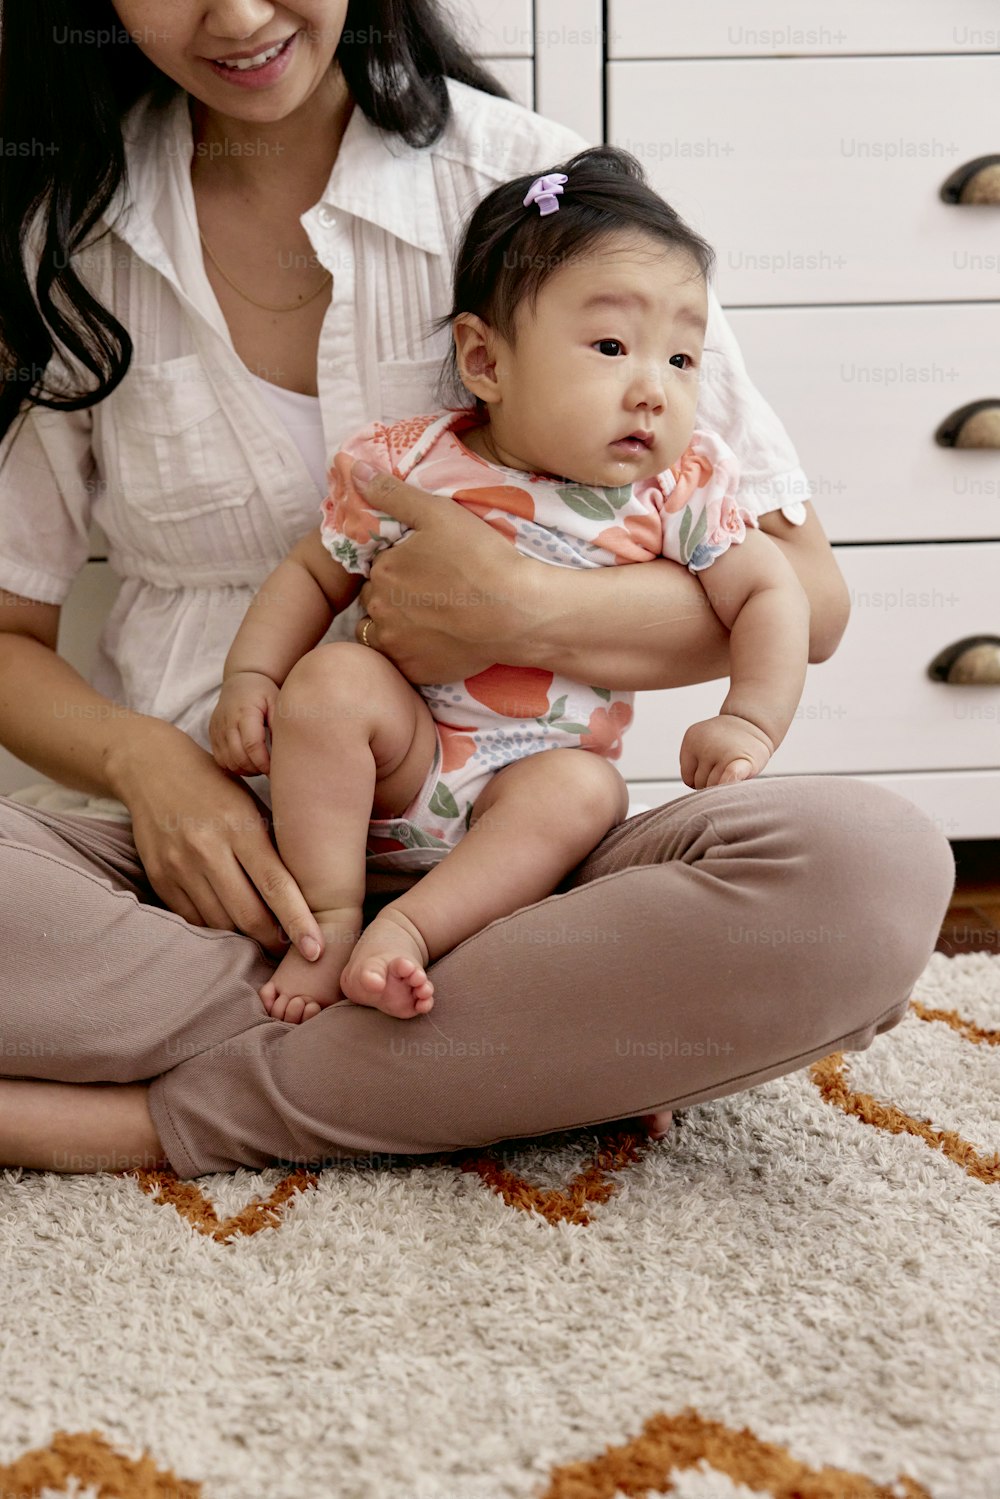 a woman sitting on the floor holding a baby